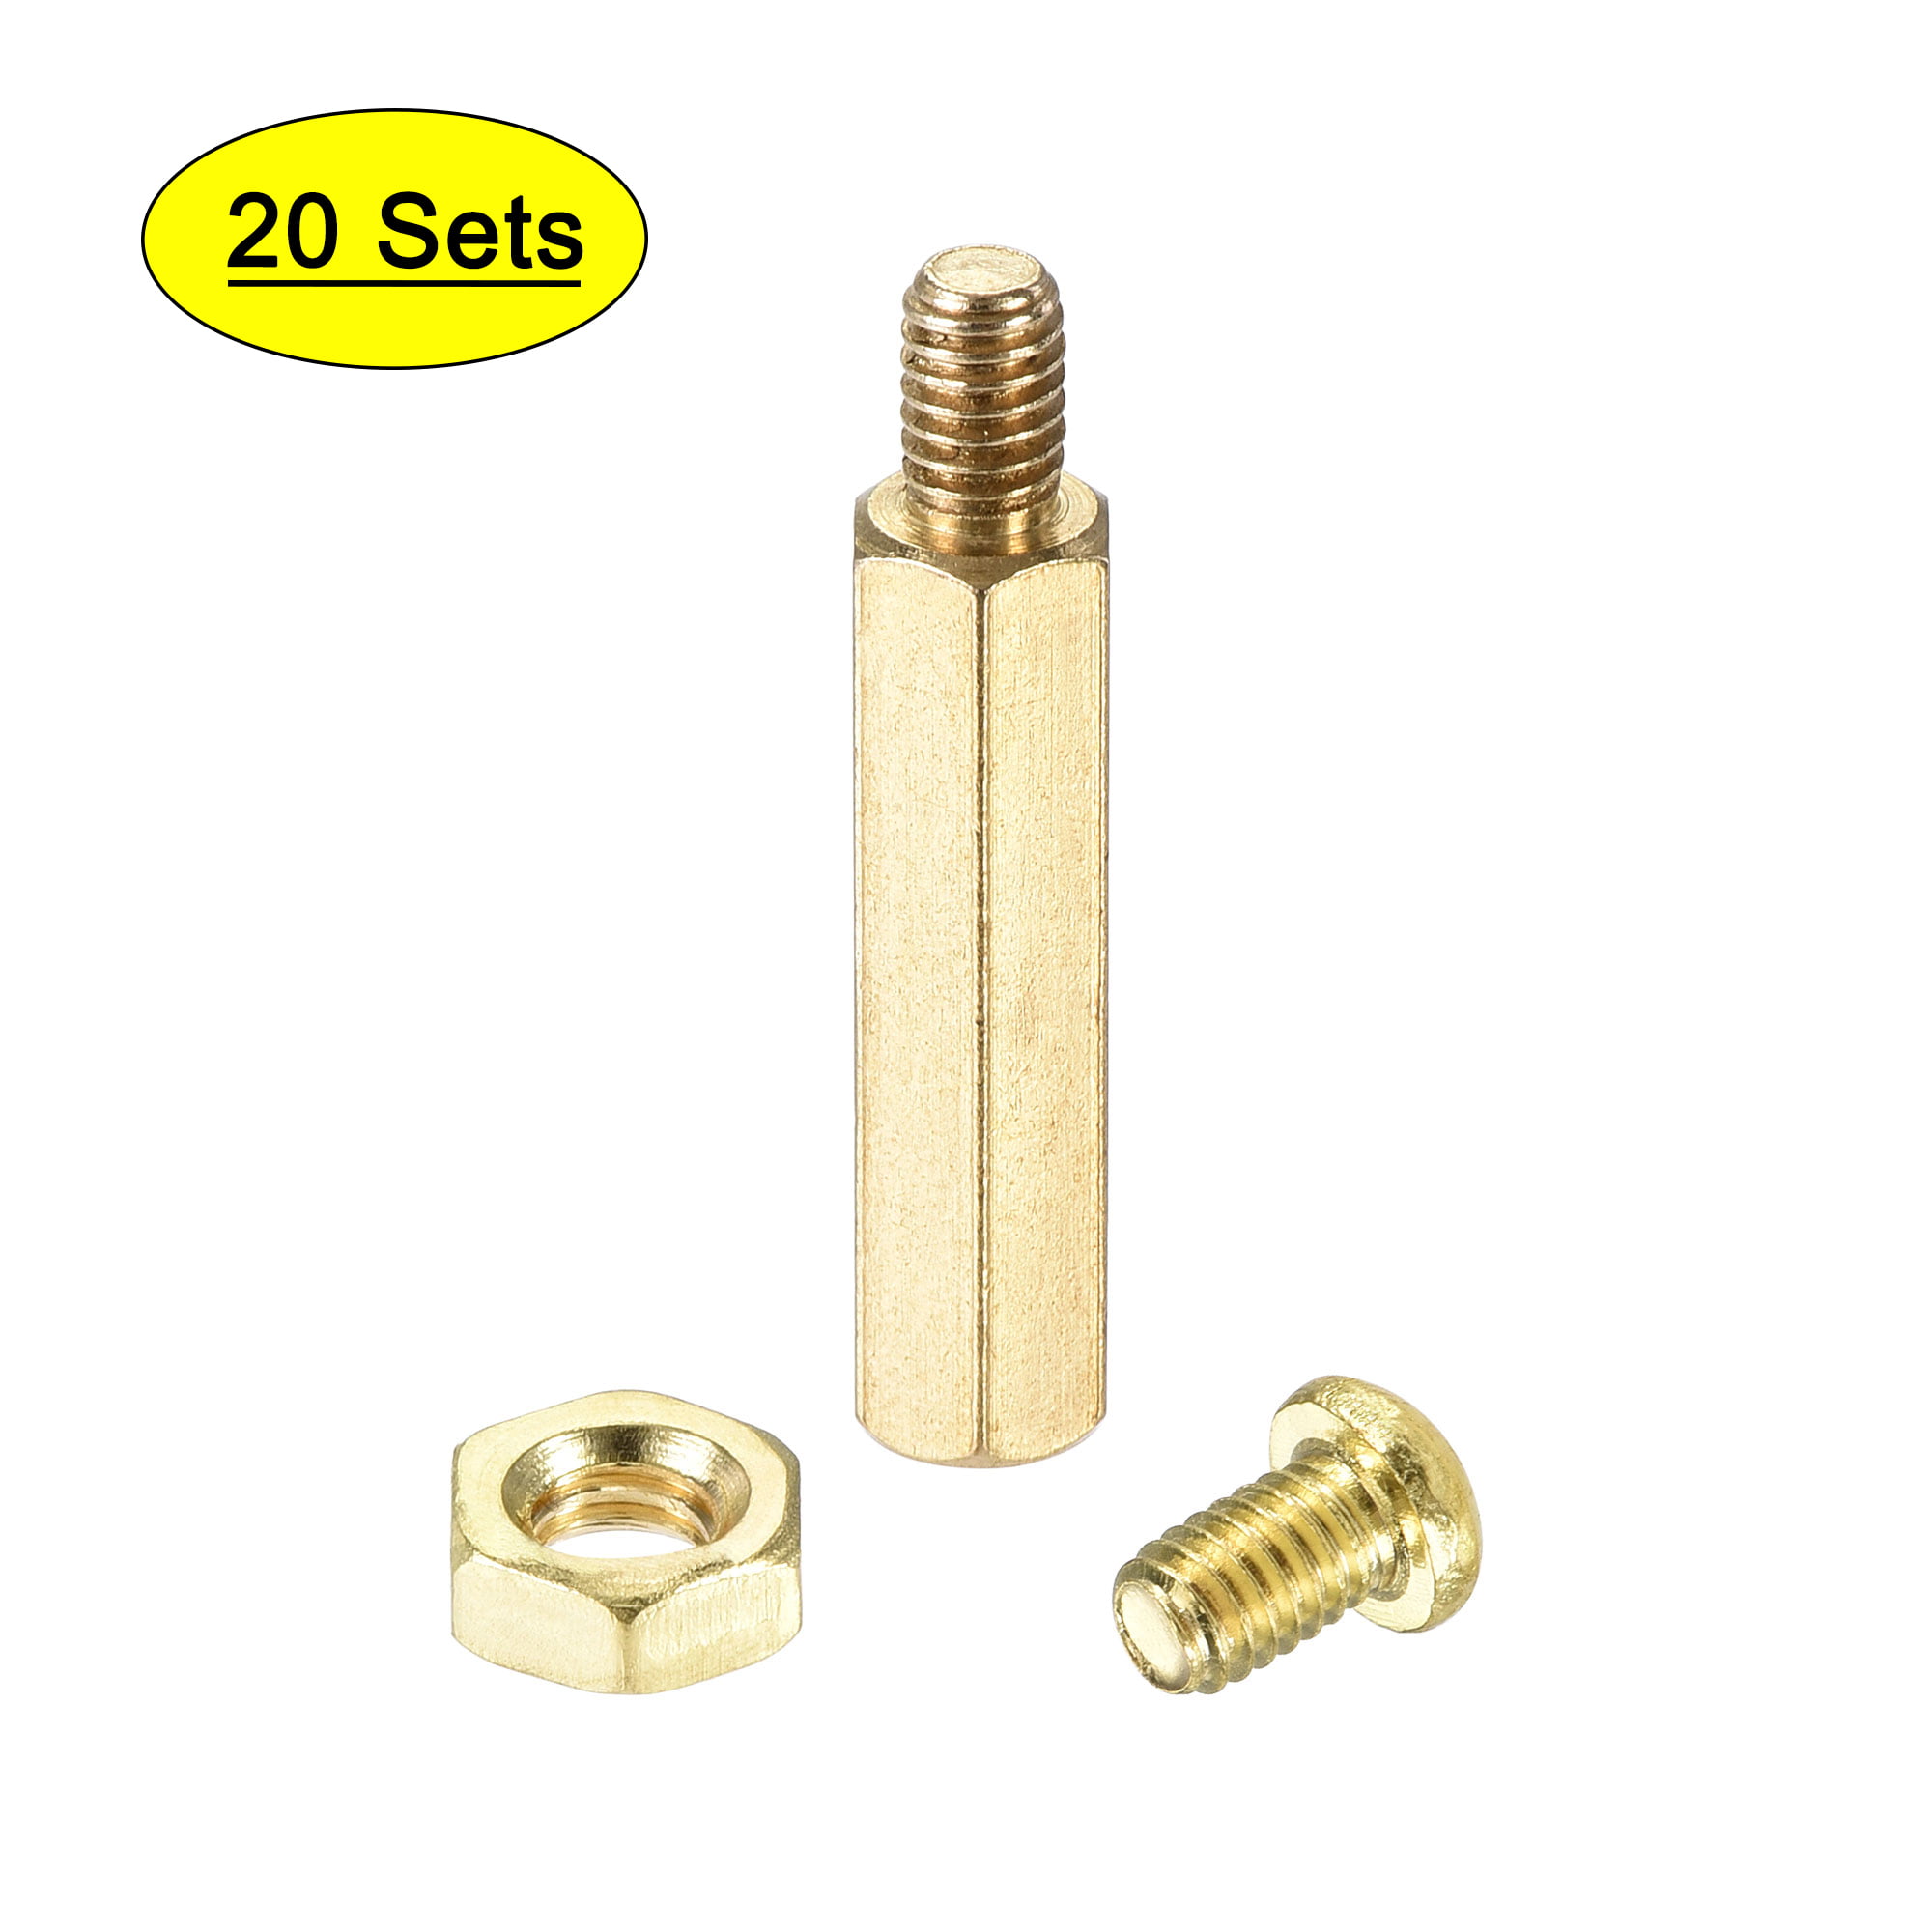 Uxcell Brass Male-Female Hex Standoff Screw Nut Kit 20 Sets 16mm+